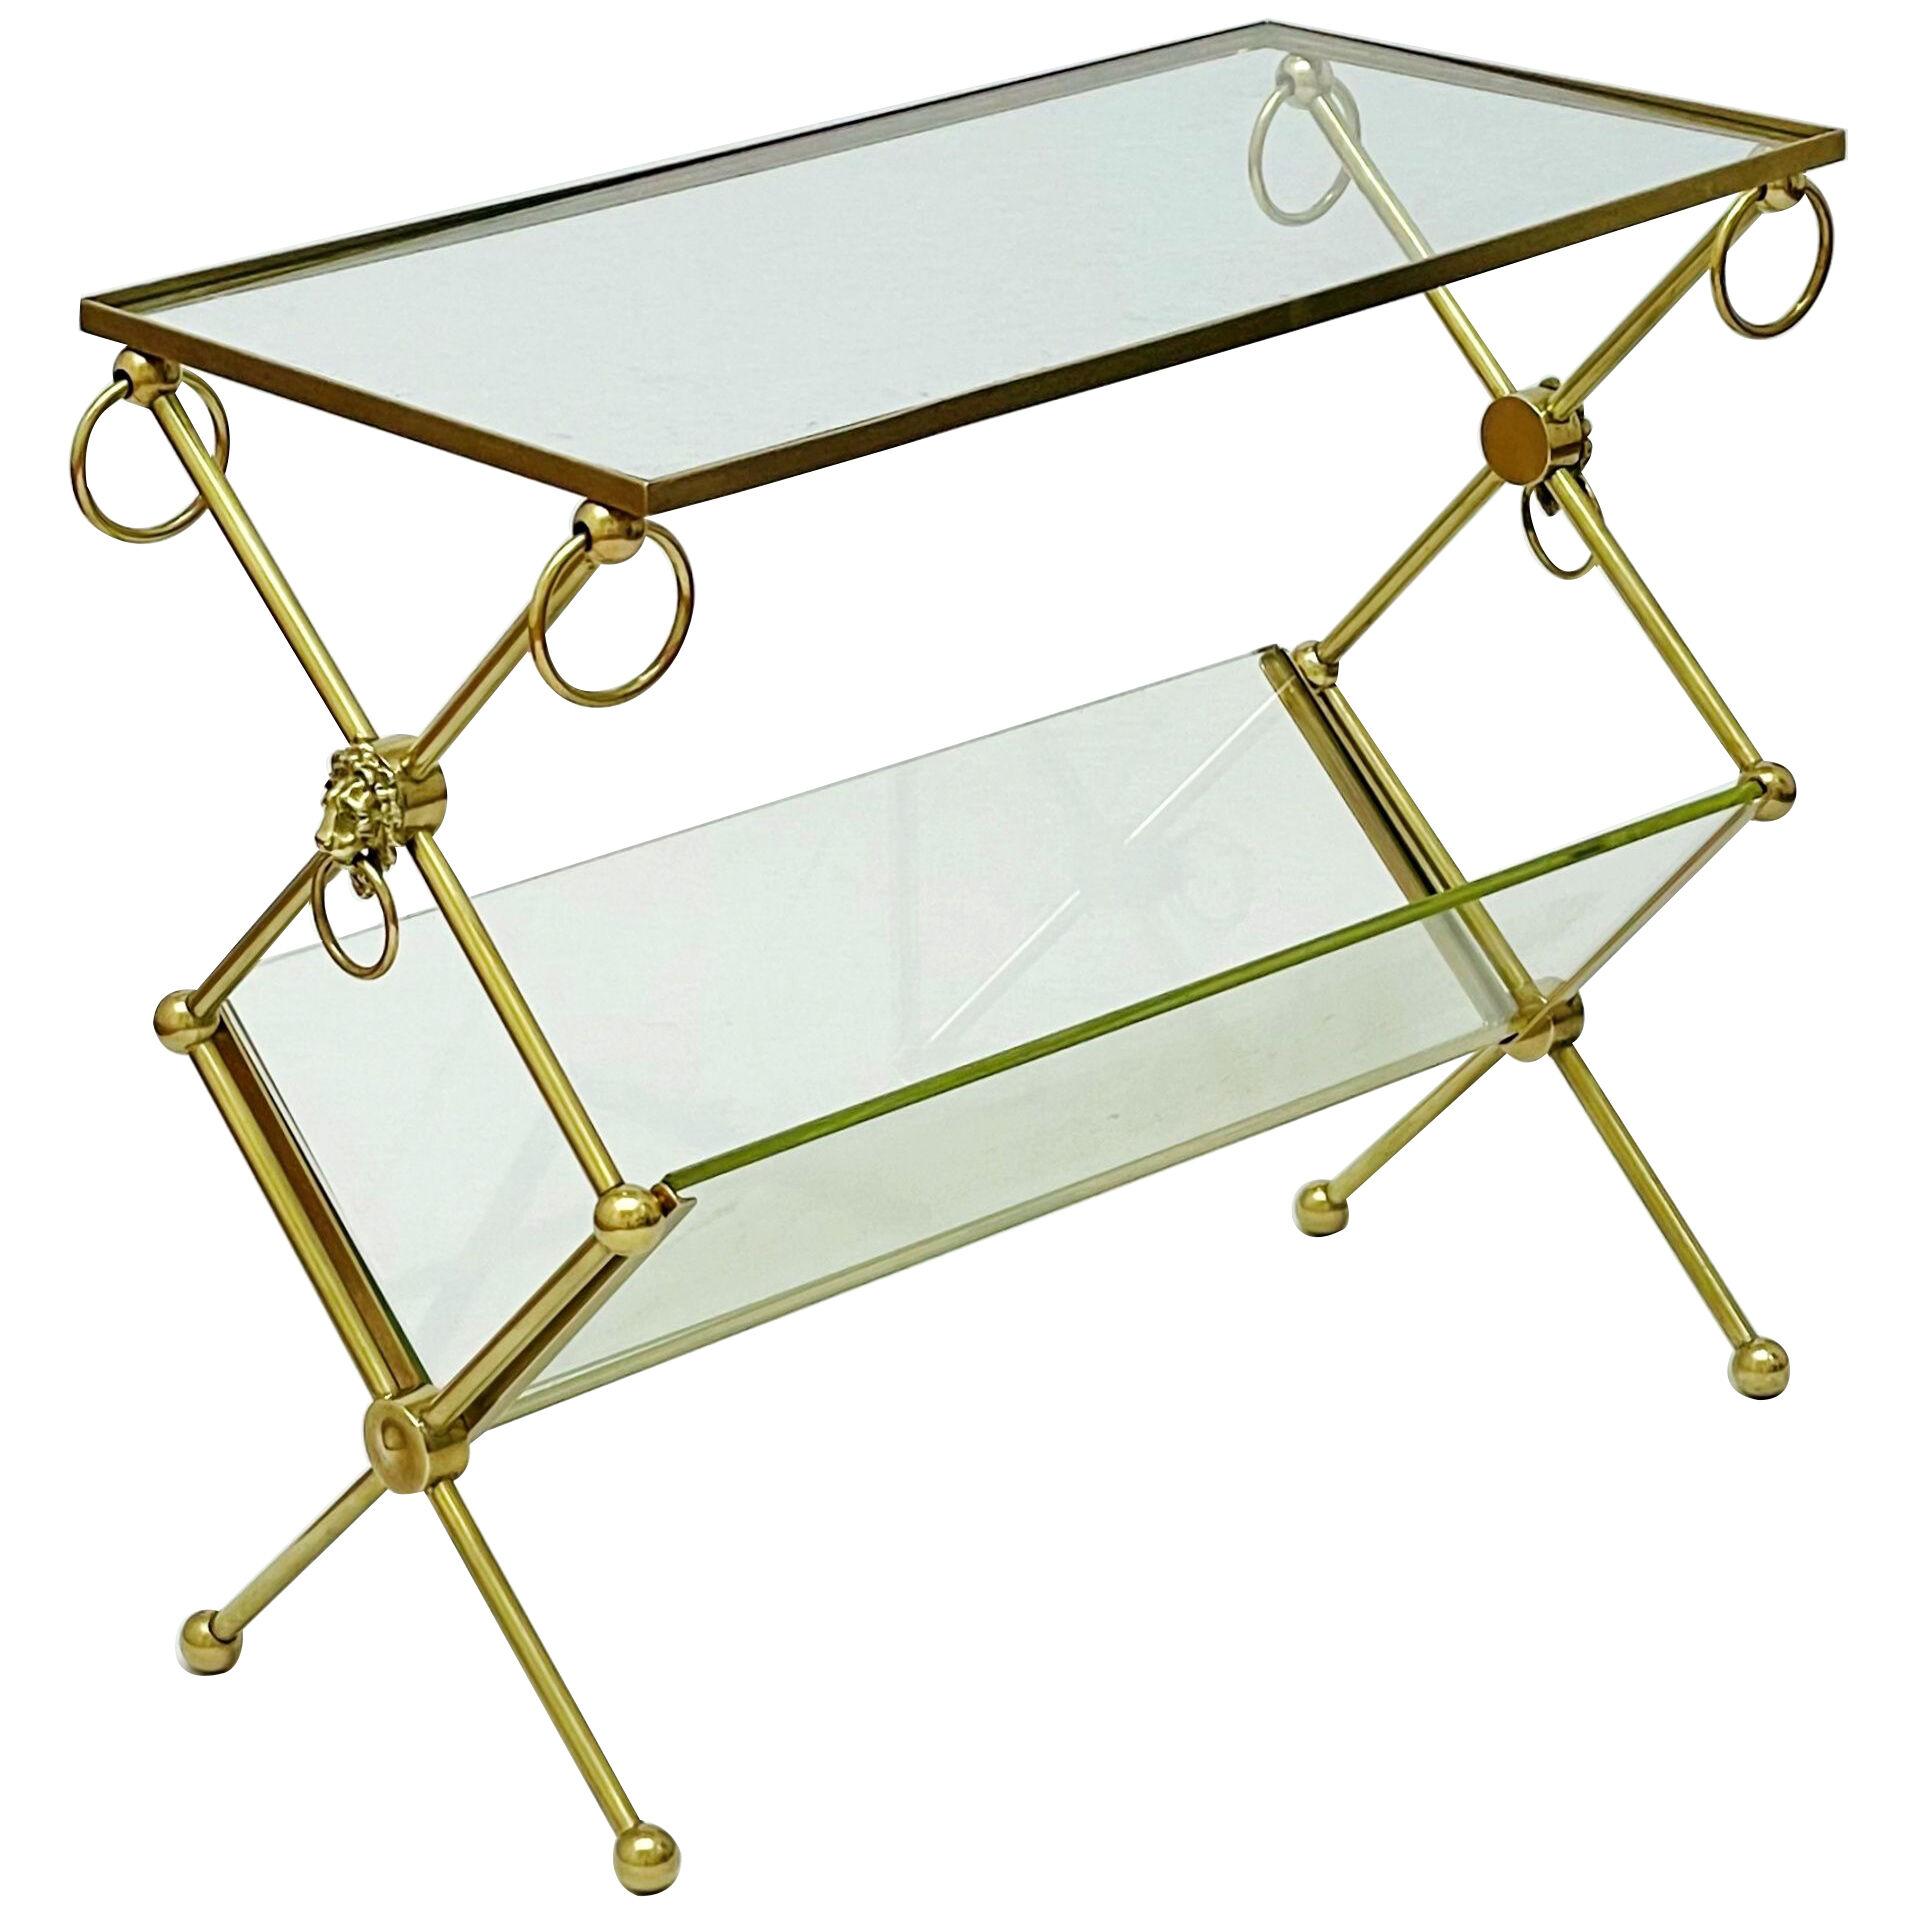 Brass and glass magazine table